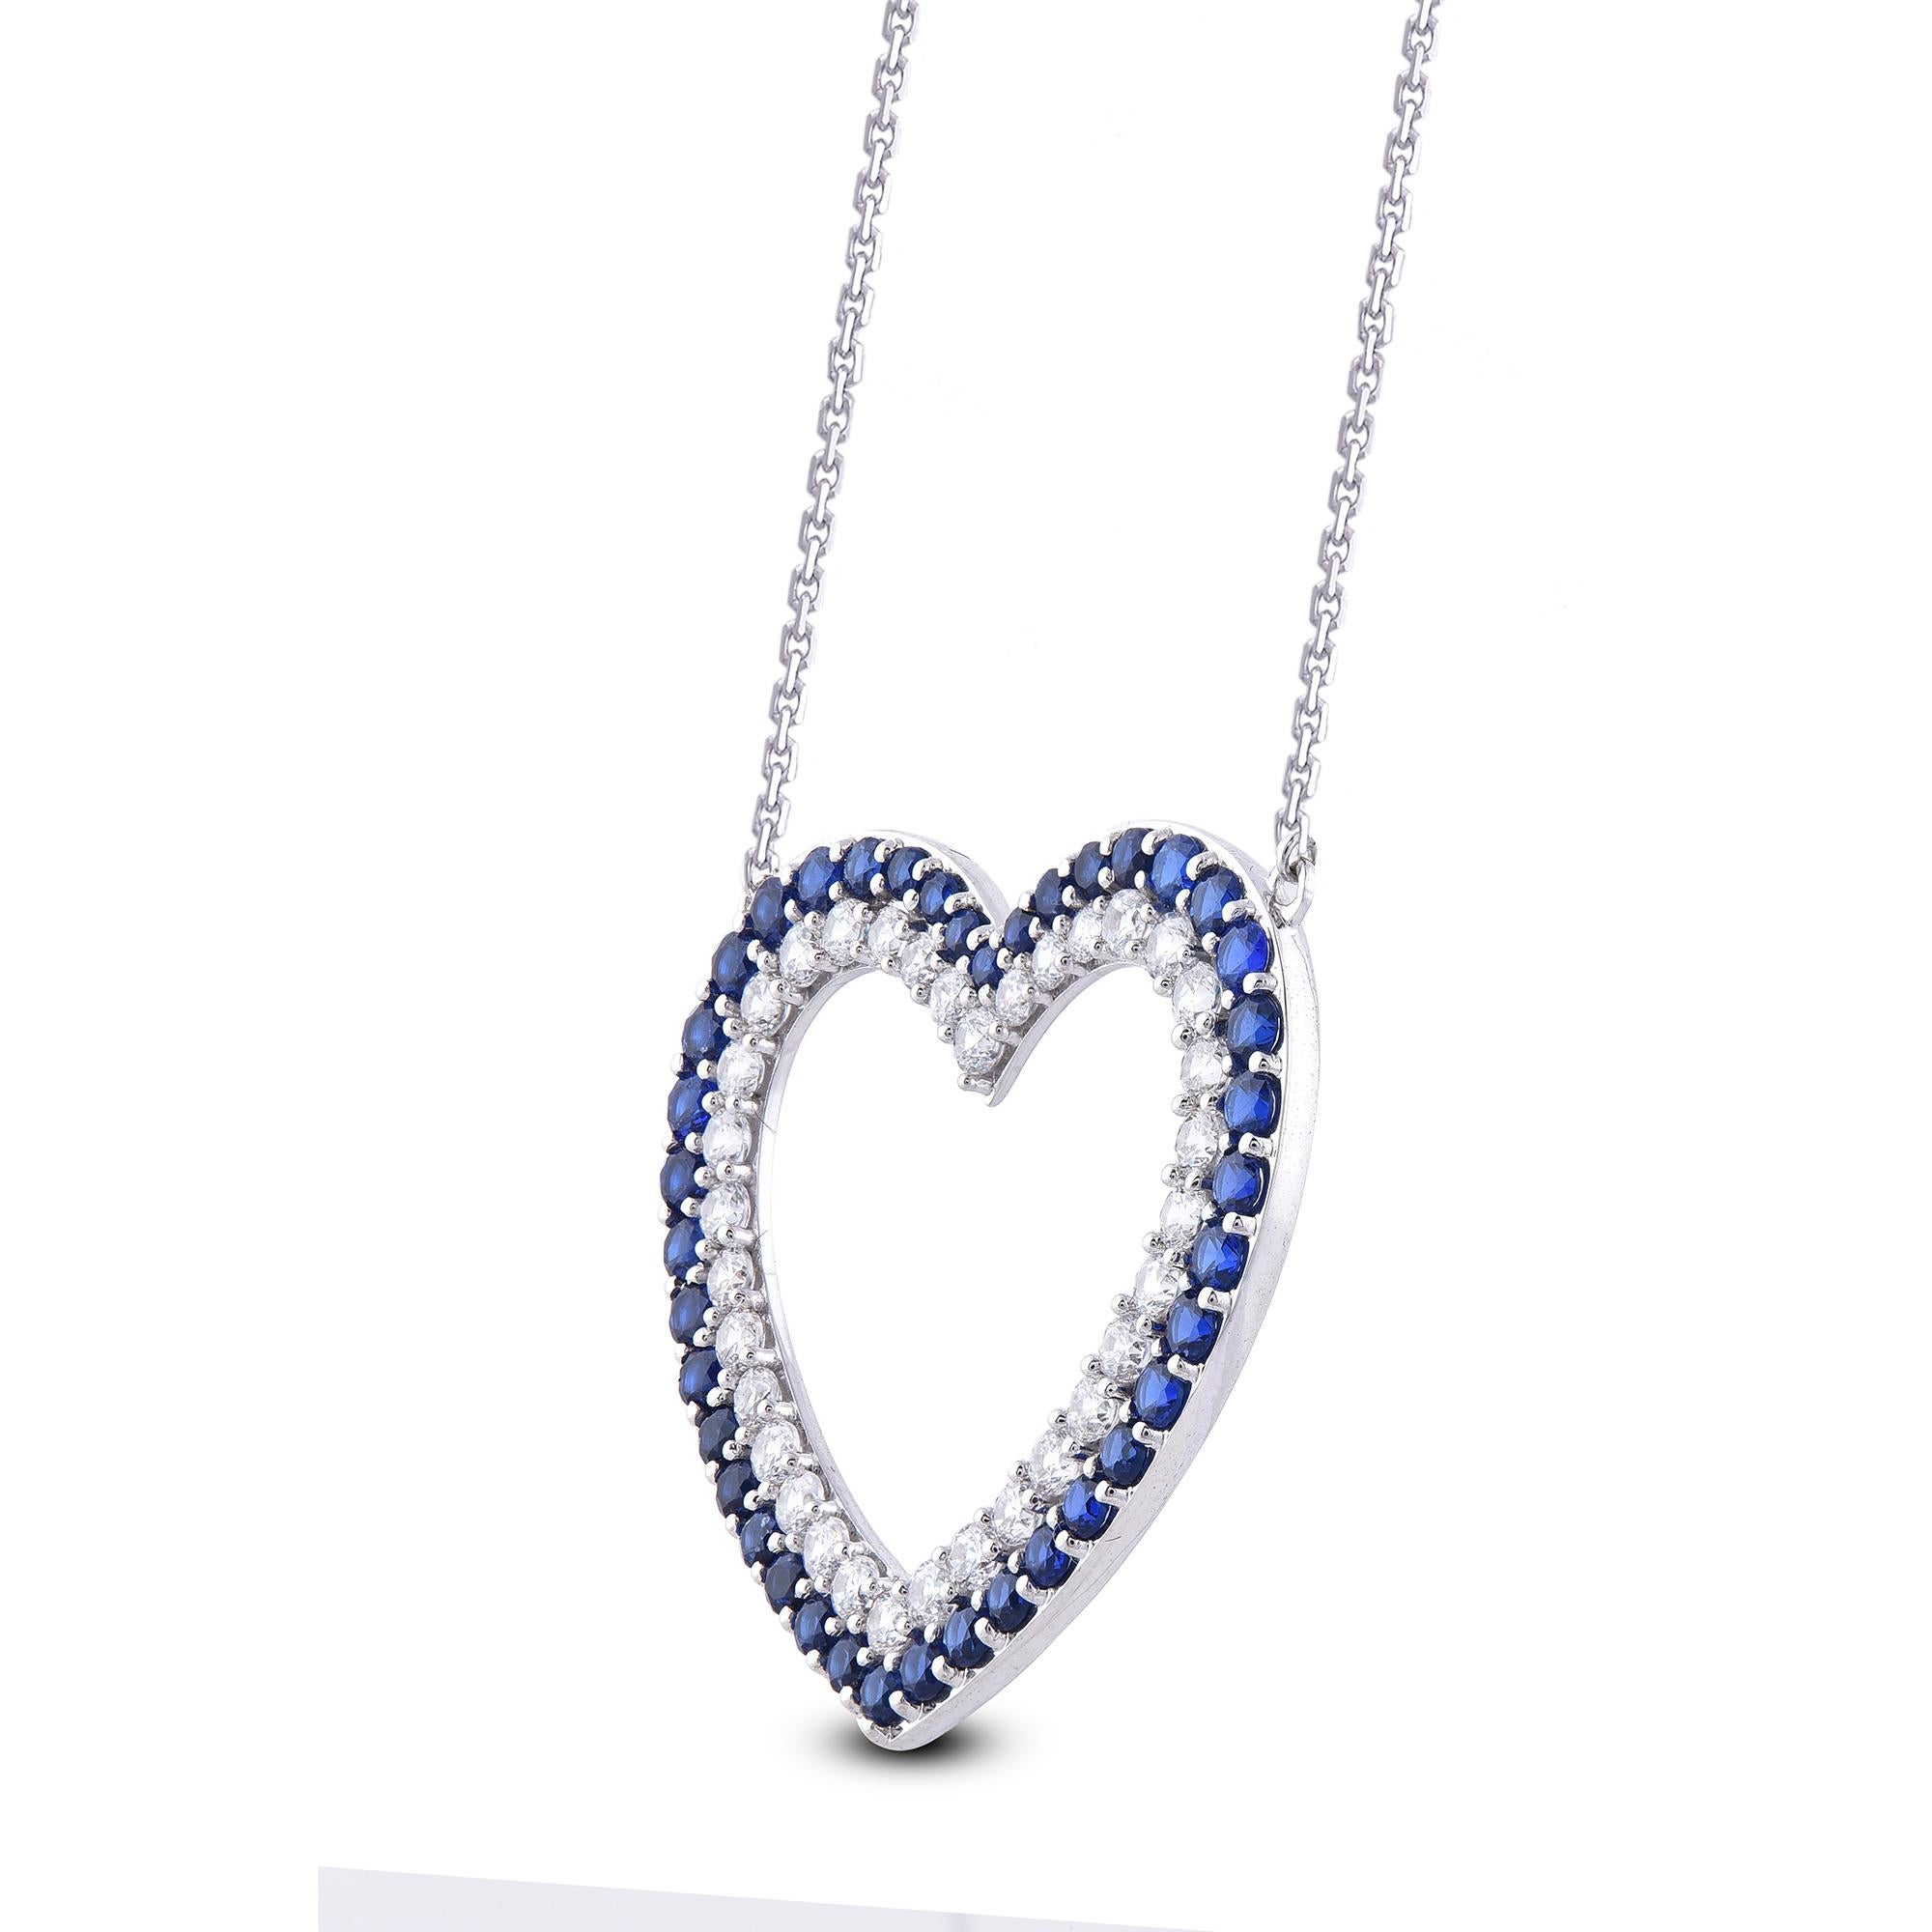 Embrace yourself with this breath-taking diamond studded heart pendant that is ready to make you shine. The pendant is crafted from 14 karat white gold and features 34 white diamond and 40 blue sapphire gemstone set in Prong setting, H-I color I2